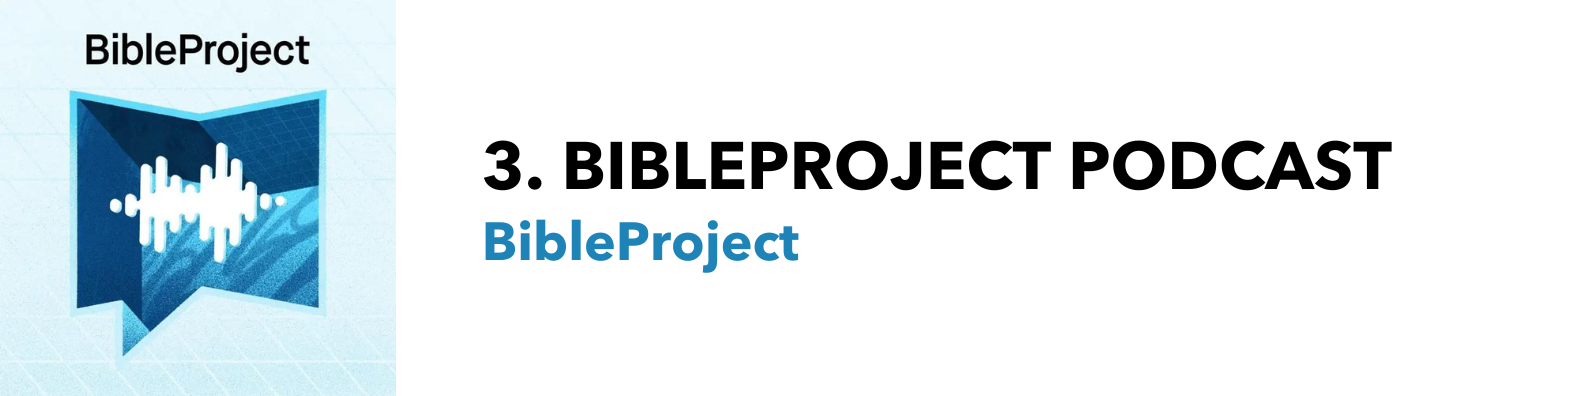 <a href="https://podcasts.apple.com/ca/podcast/bibleproject/id1050832450">Listen on Apple Podcasts</a>